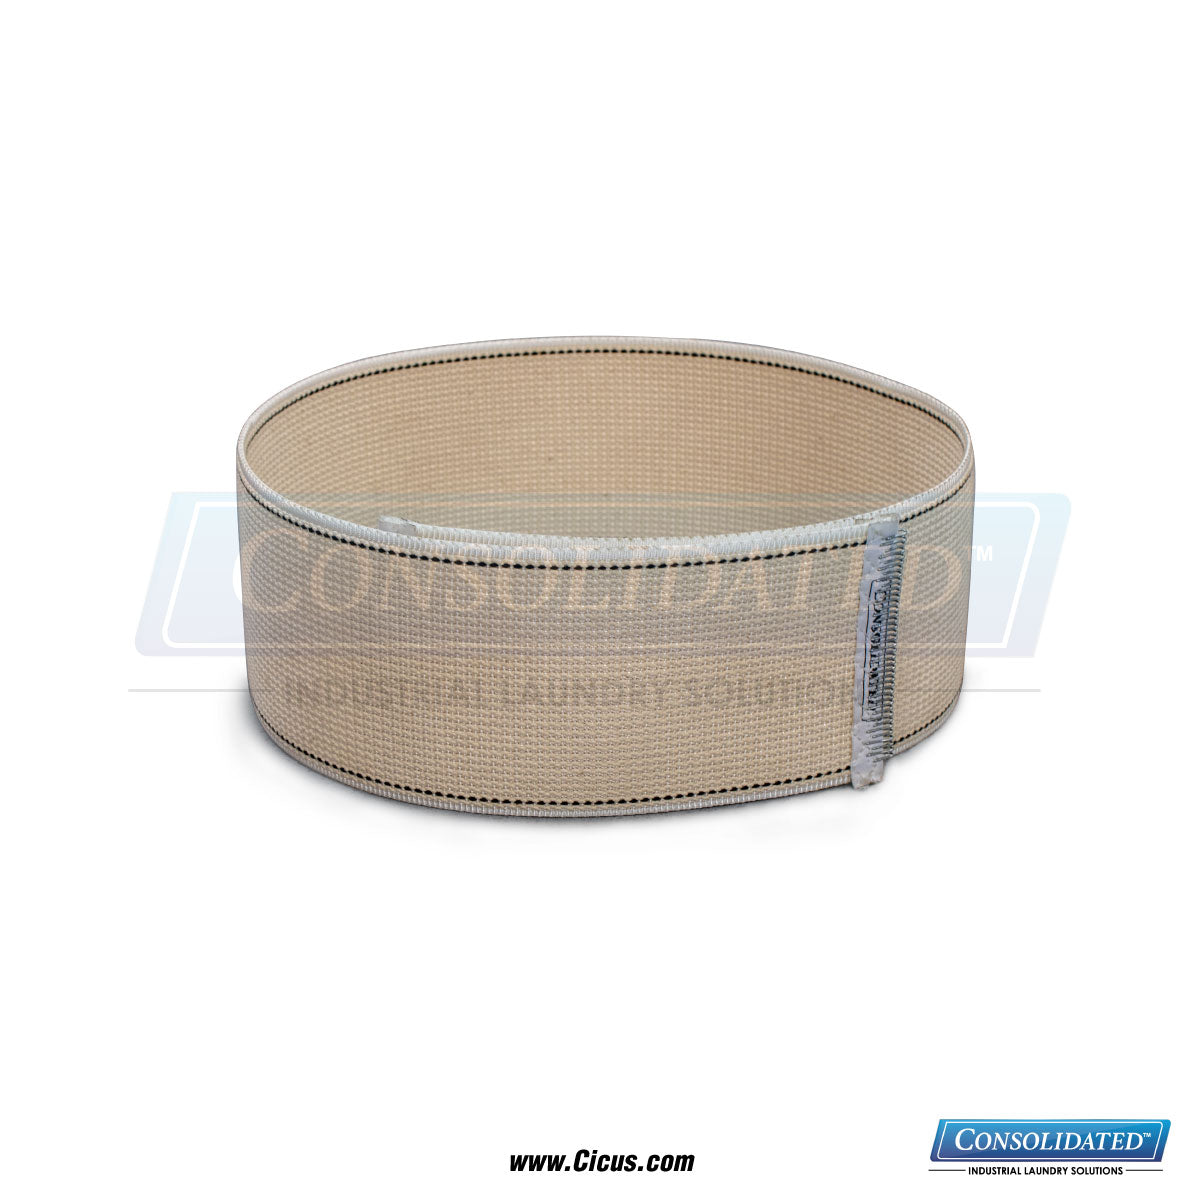 Chicago Dryer Canvas Ribbon Extension - 2" x 42" [1001-001]